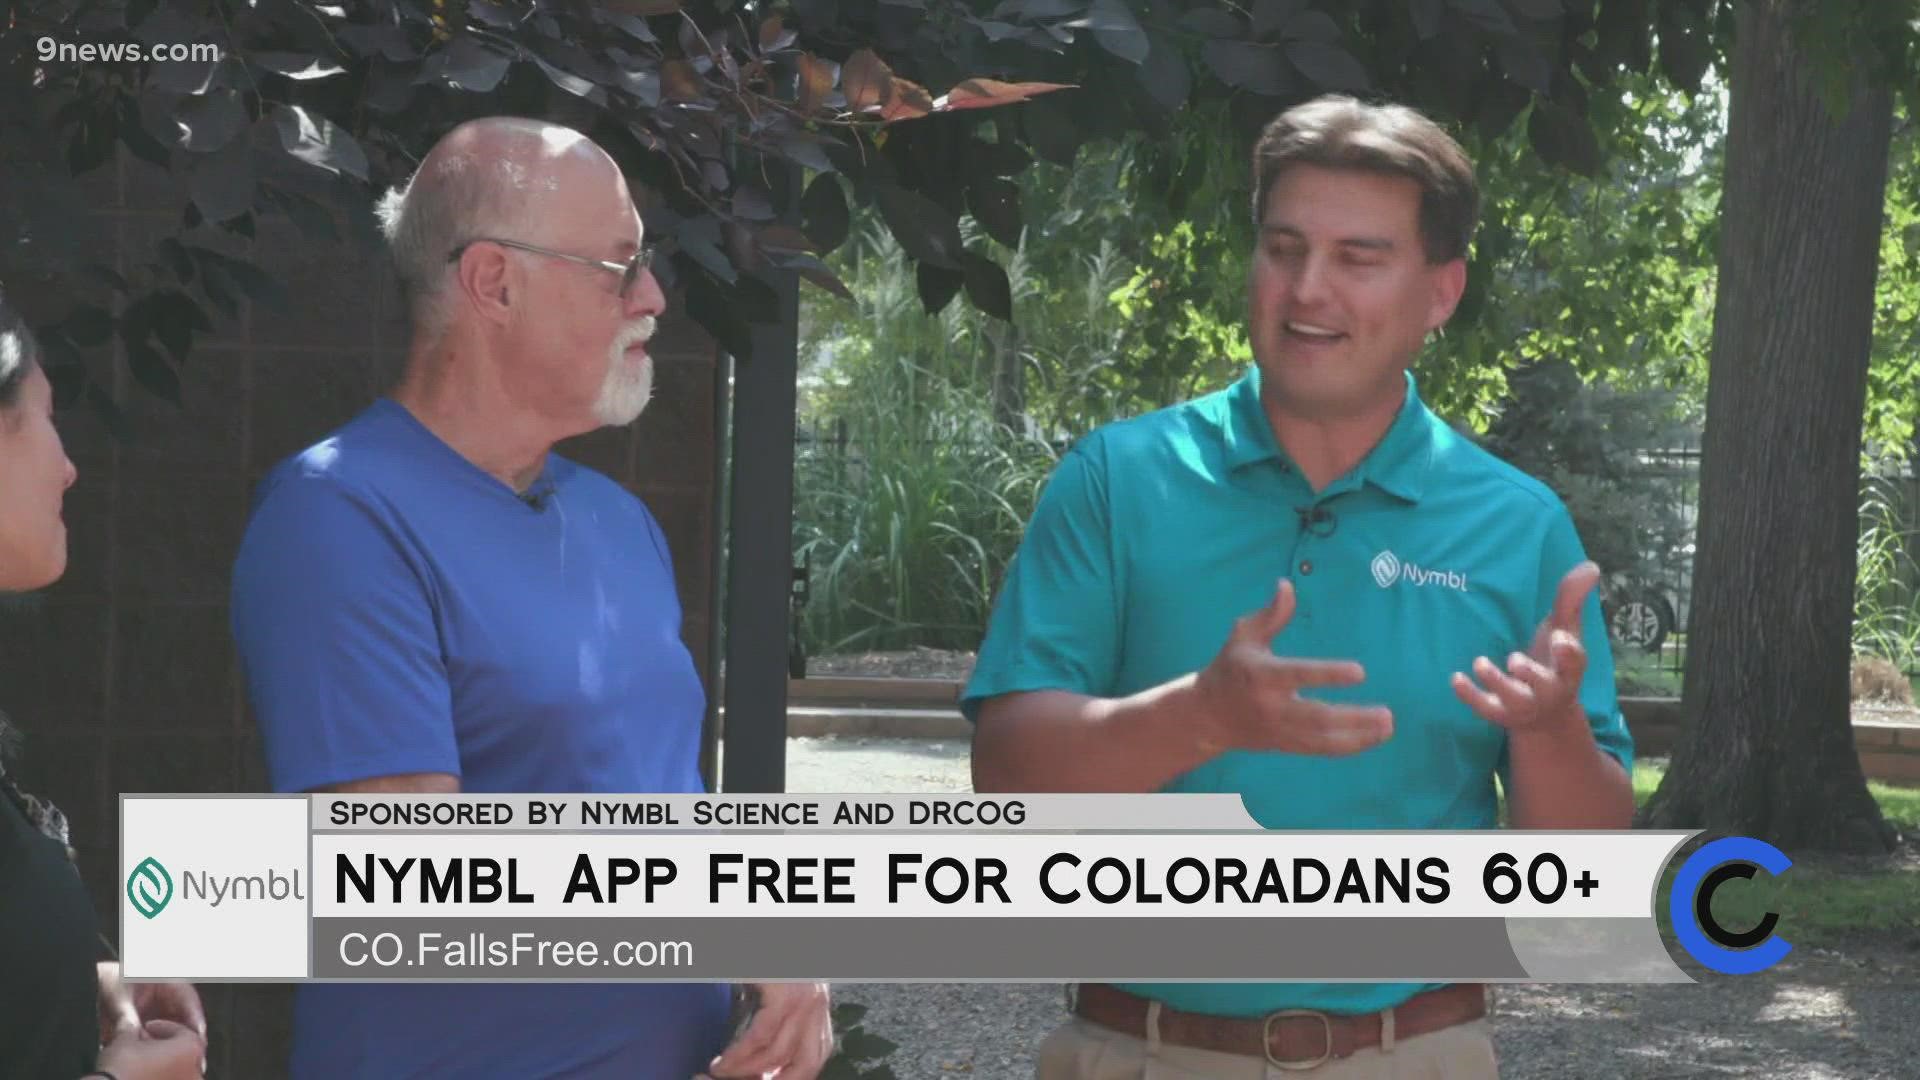 Nymbl is free for all Coloradans 60 and up. Visit CO.FallsFree.com to learn more about improving your balance. **PAID CONTENT**